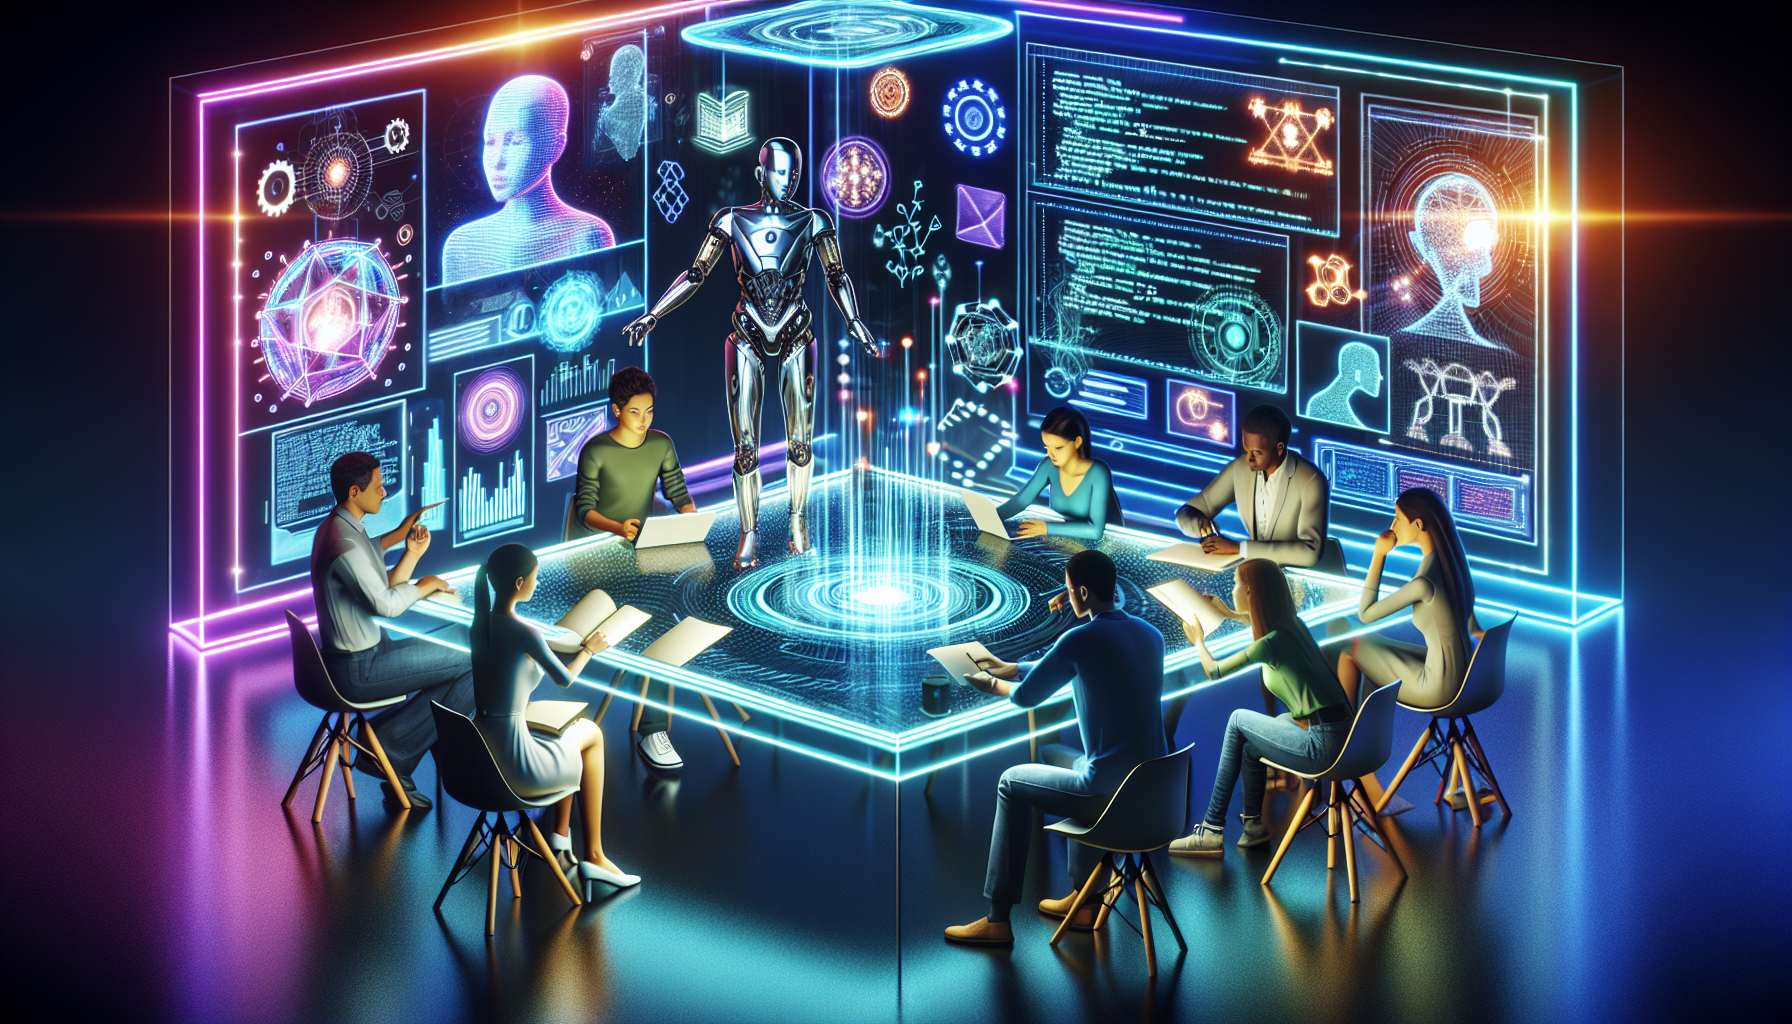 An imaginative scene depicting a futuristic room where a humanoid robot and a diverse group of screenwriters sit around a high-tech, holographic table, collaboratively brainstorming and visualizing a